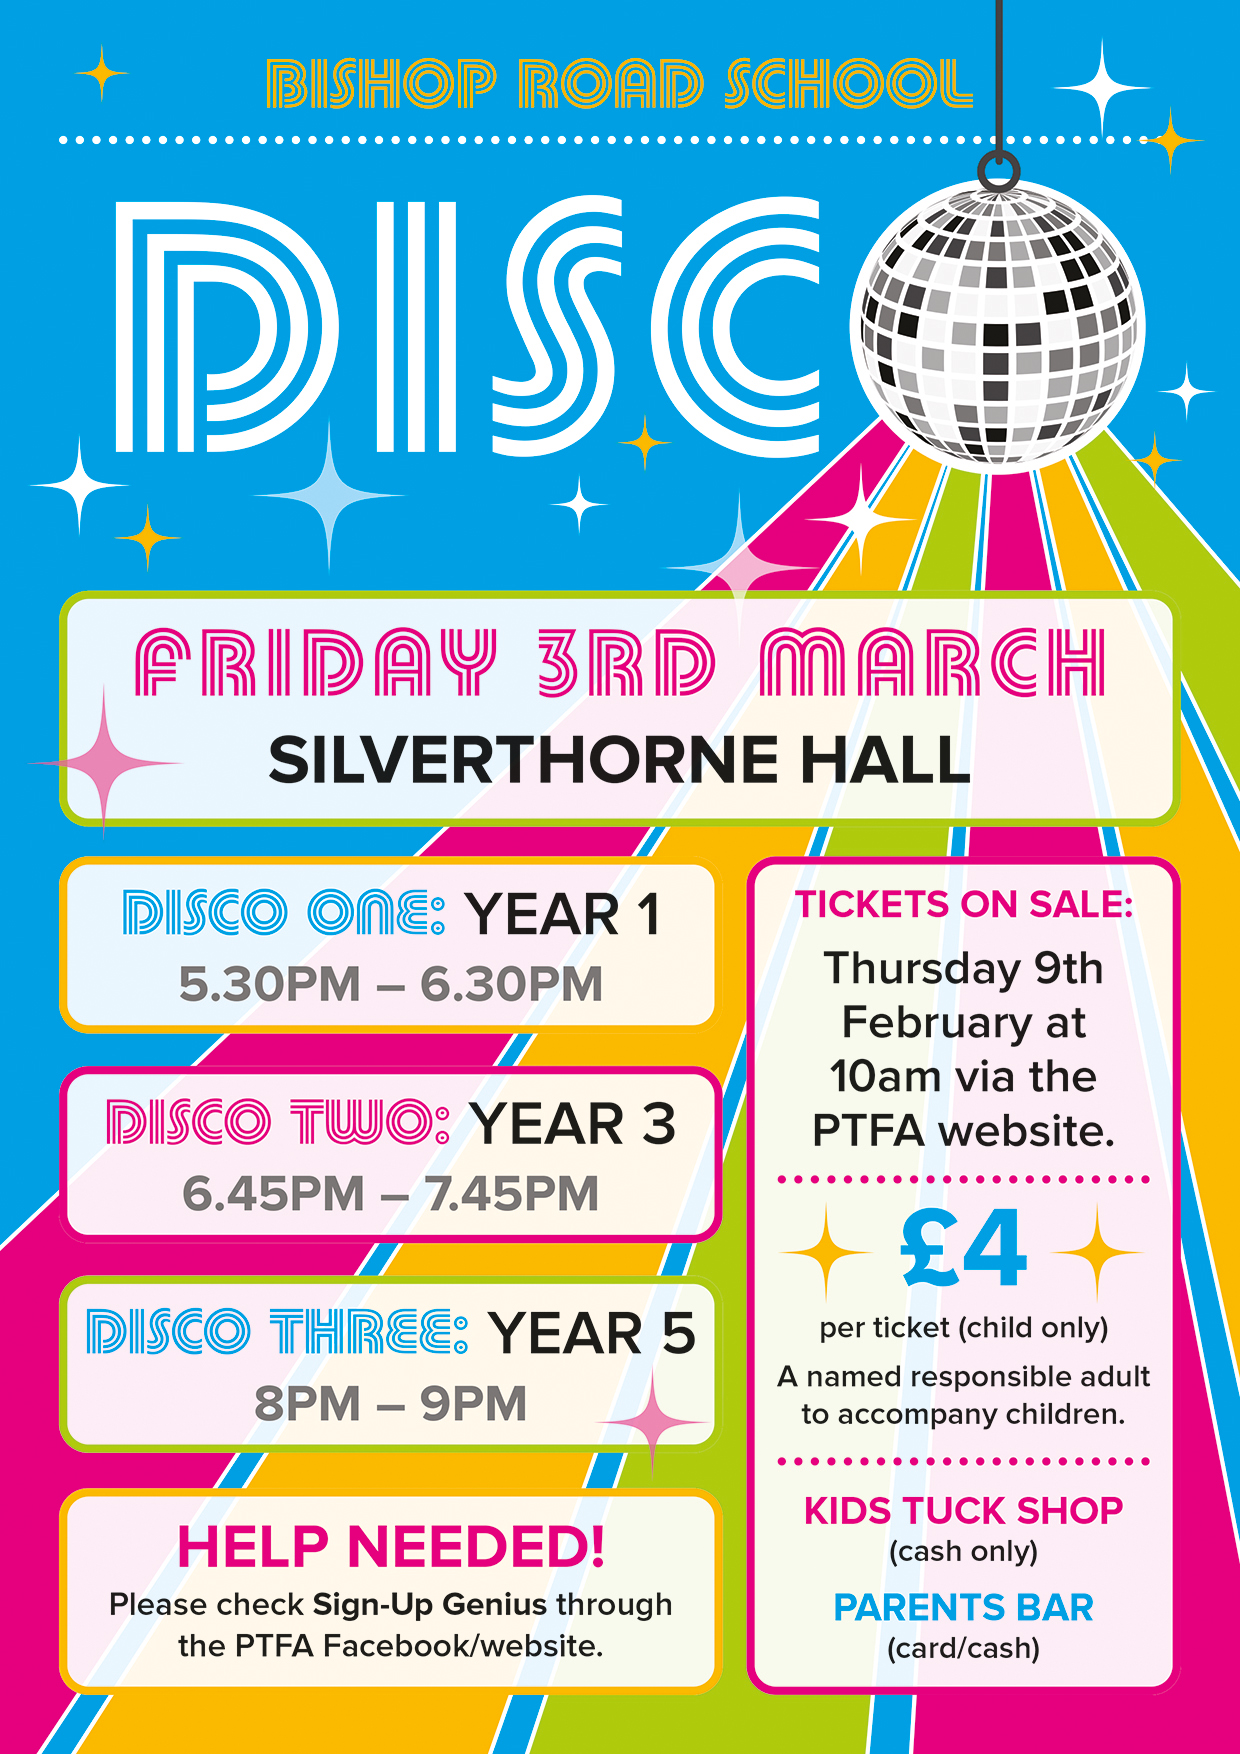 School disco for years 1, 3 and 5